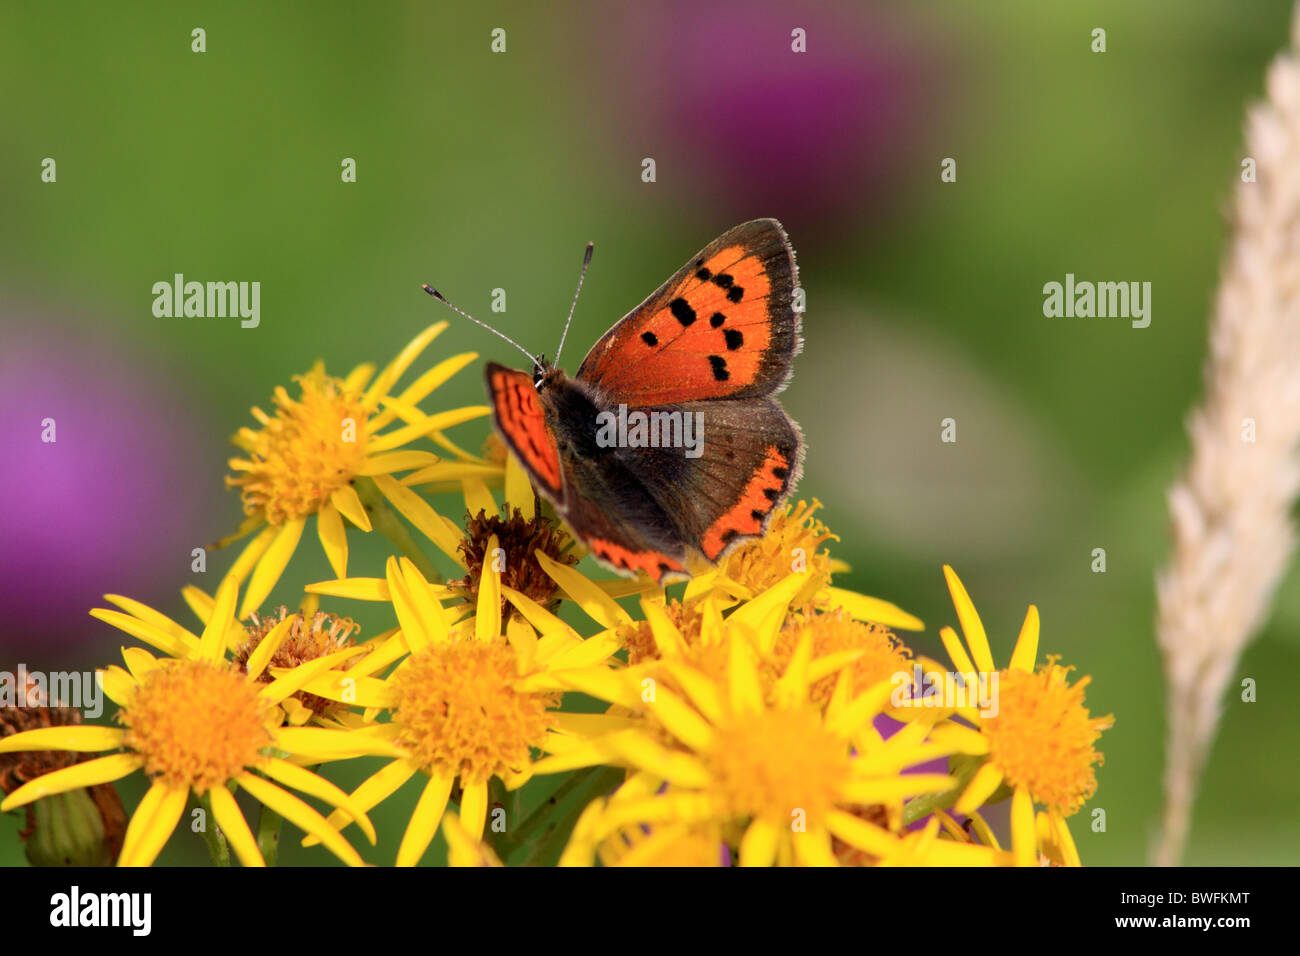 UK Butterfly Small Copper ( Lycaena phlaeas ) on wild flower Common Ragwort Stock Photo